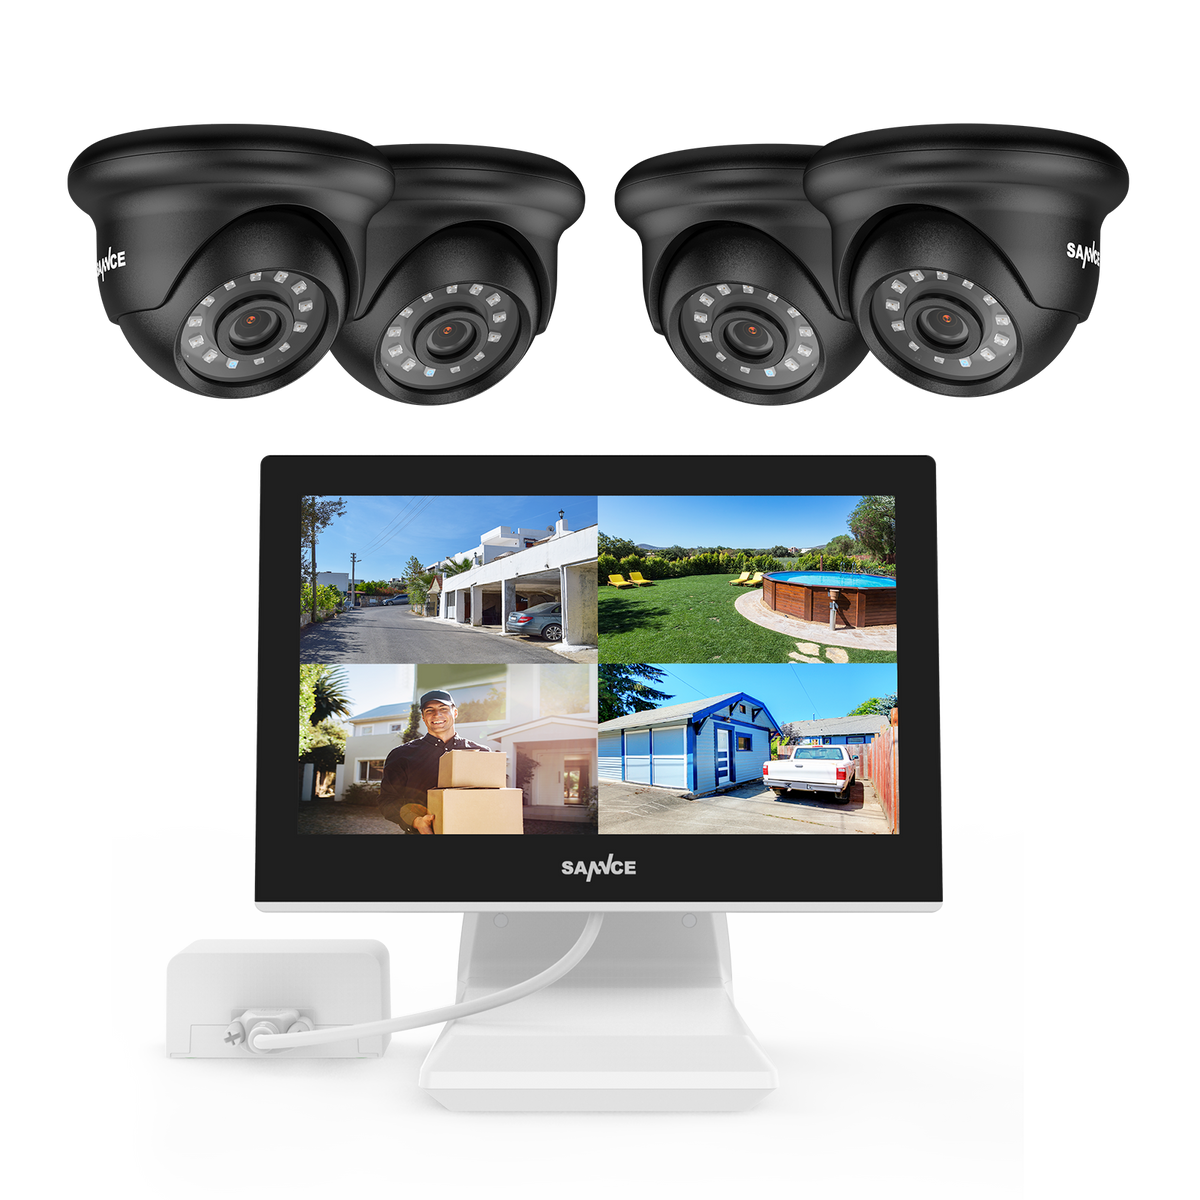 1080P 4 Channel DVR w/ 4pcs 2MP Outdoor Dome Security Camera System, 10.1’’ LCD Colorful Monitor